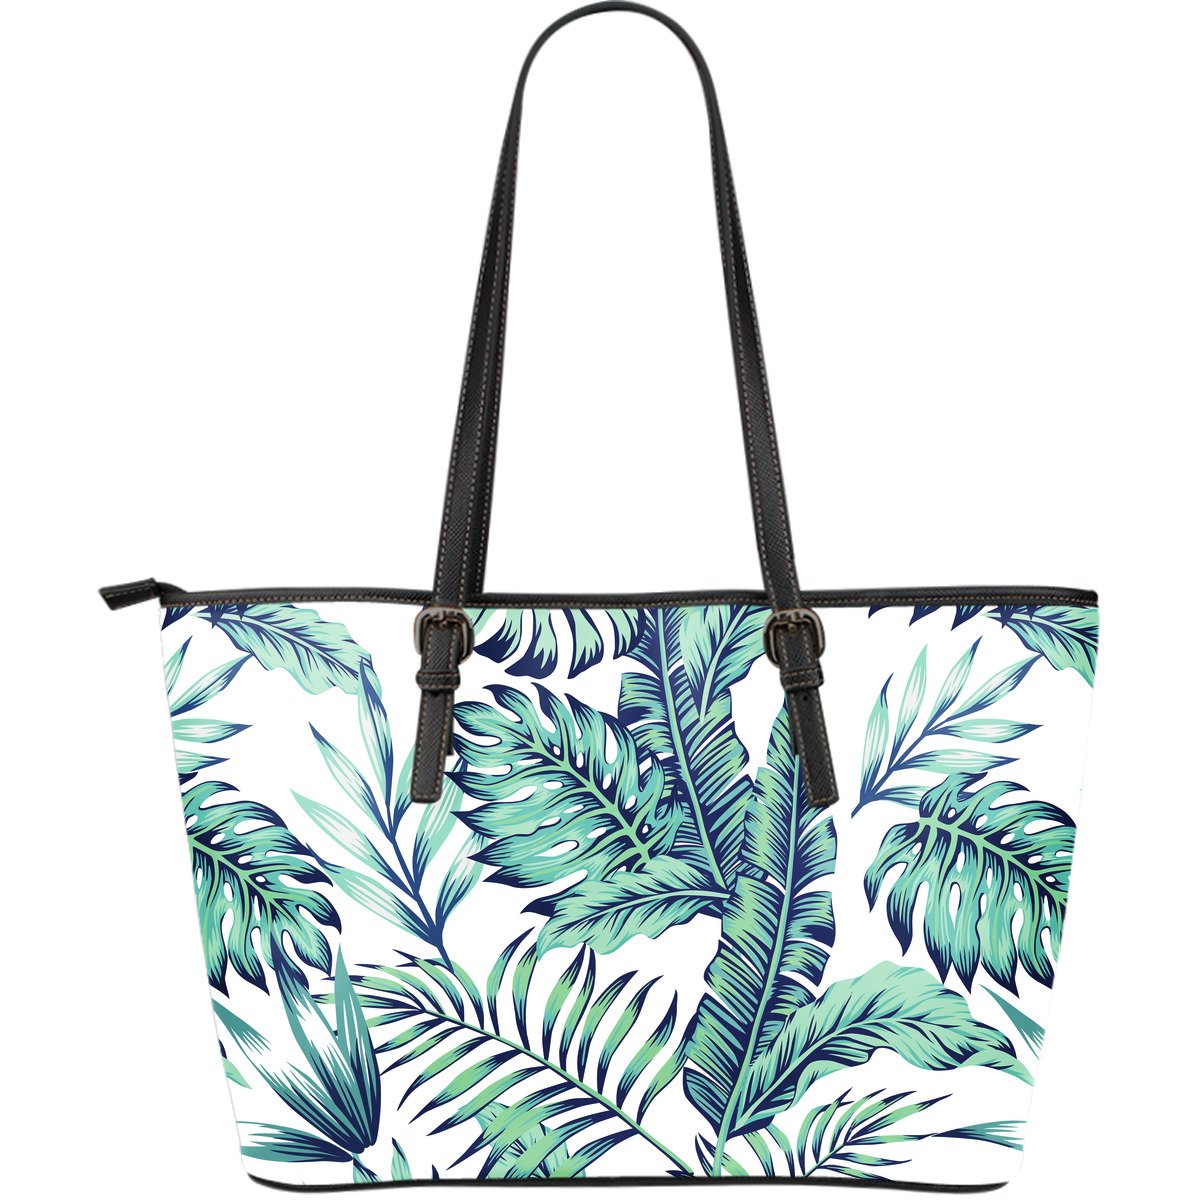 Pattern Tropical Palm Leaves Leather Tote Bag - JorJune